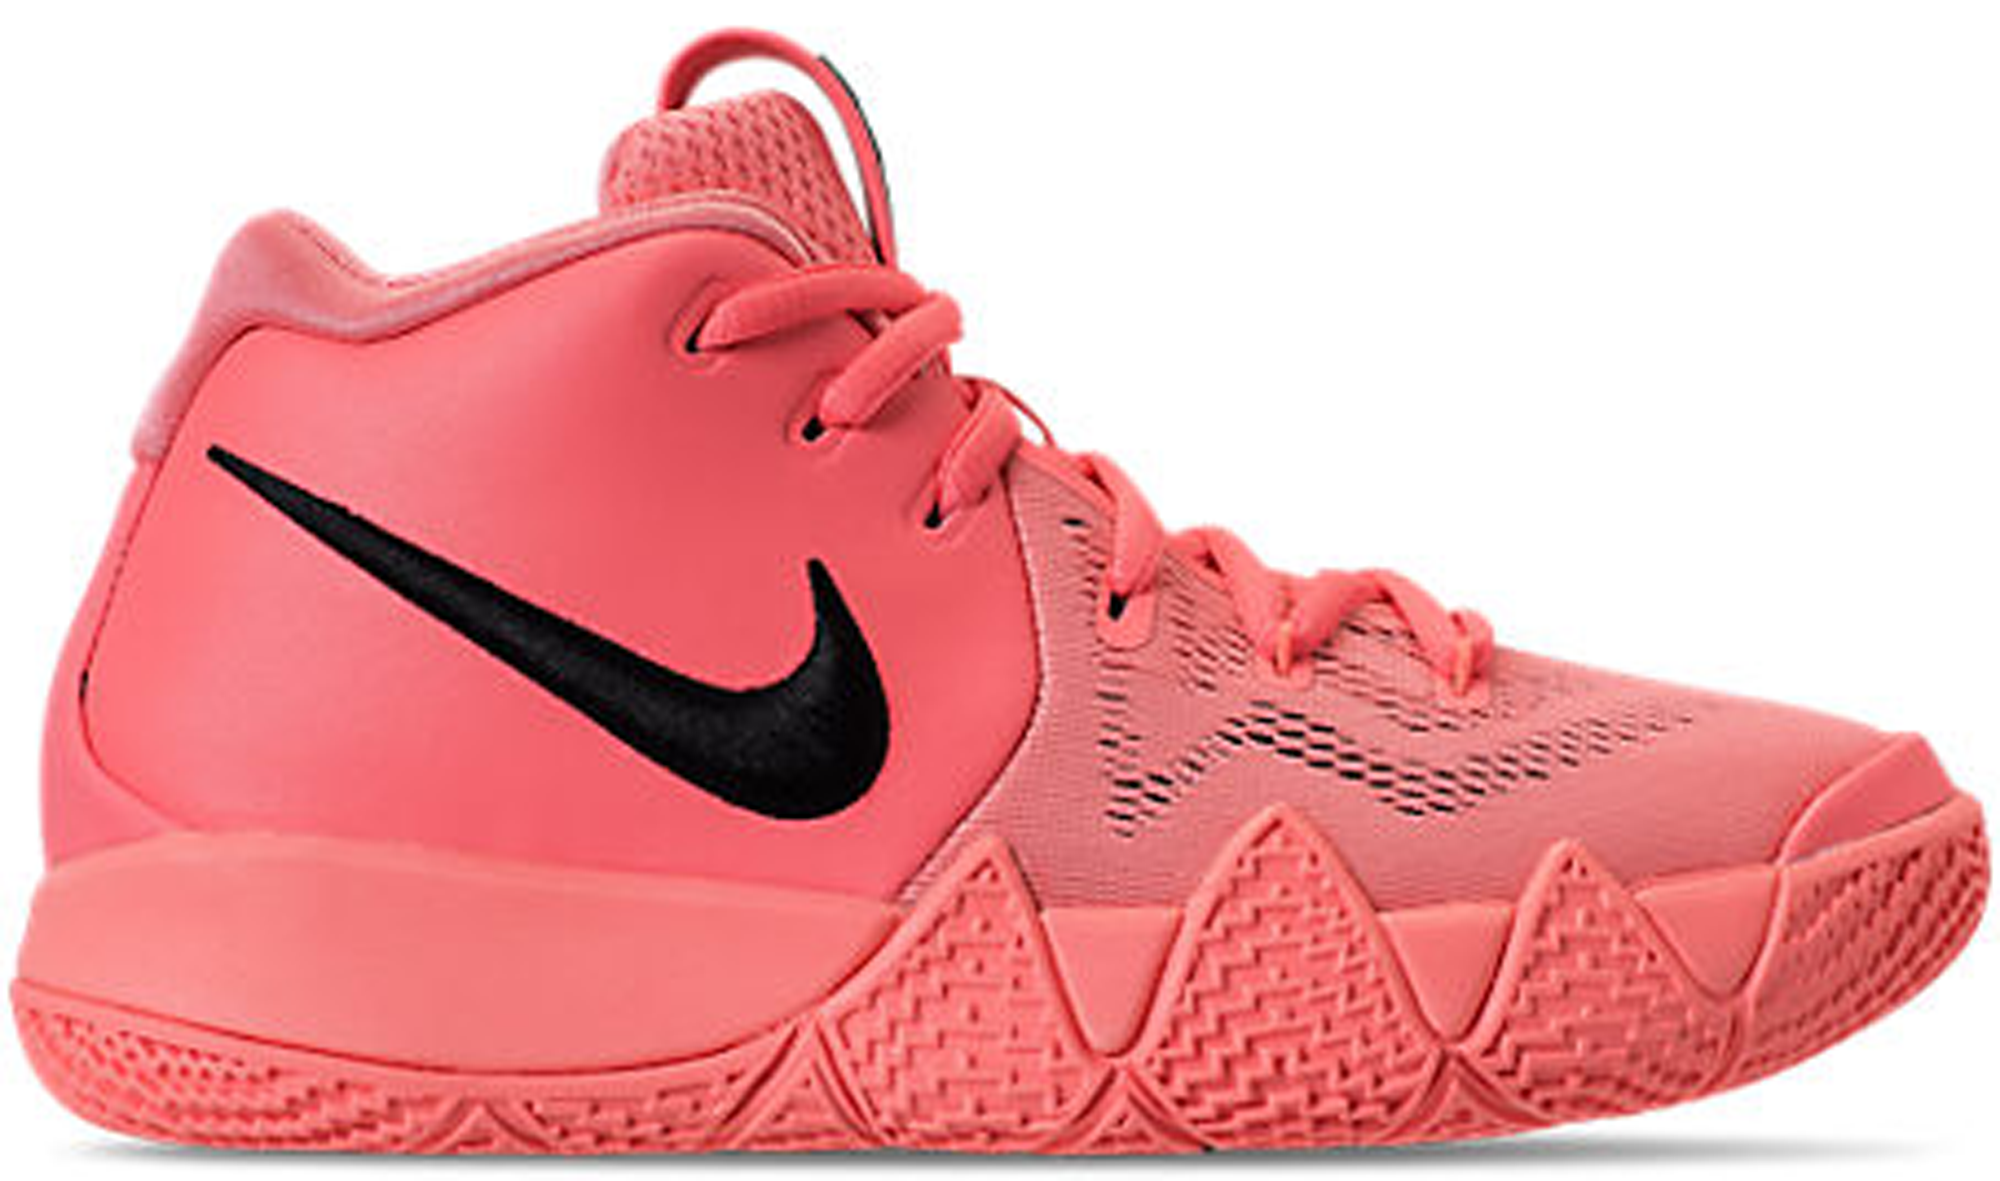 kyrie hot pink